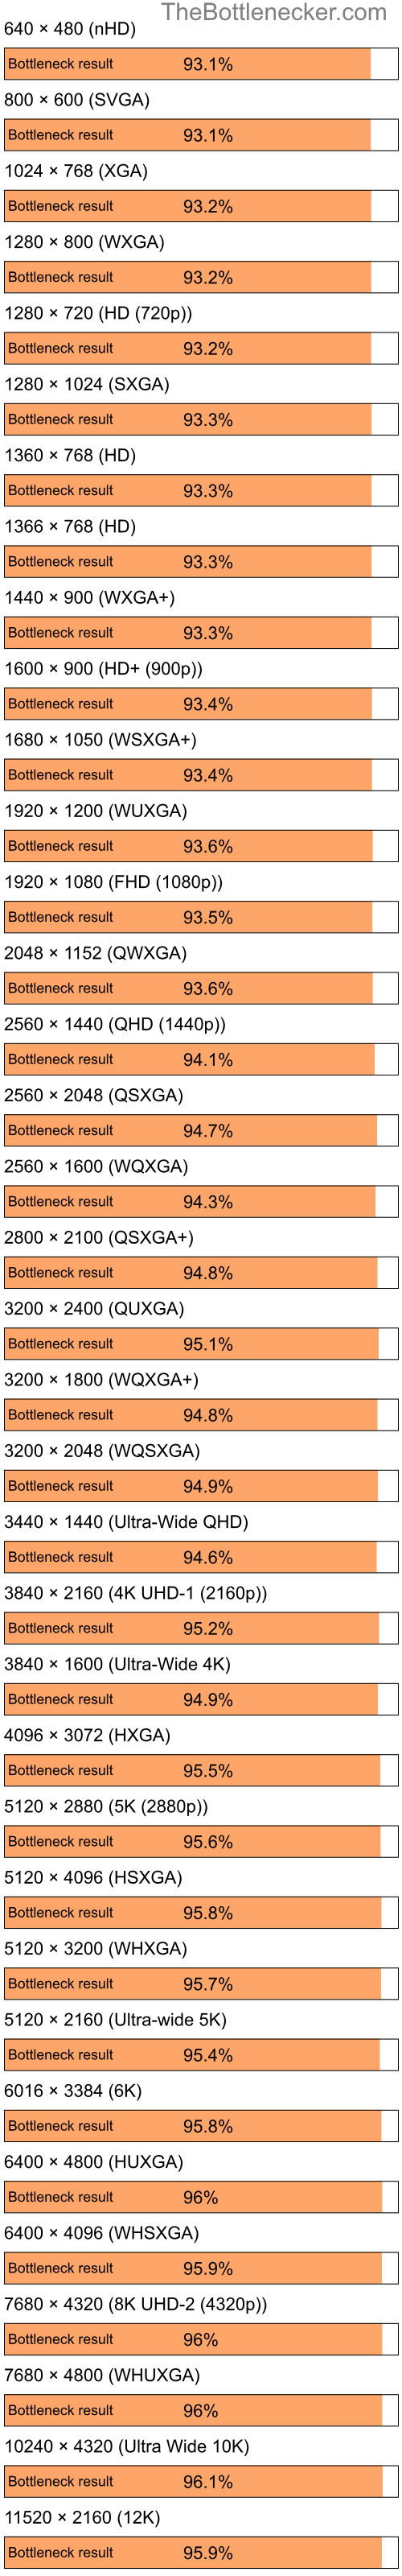 Bottleneck results by resolution for Intel Pentium 4 and AMD Radeon 9200 SE in Graphic Card Intense Tasks